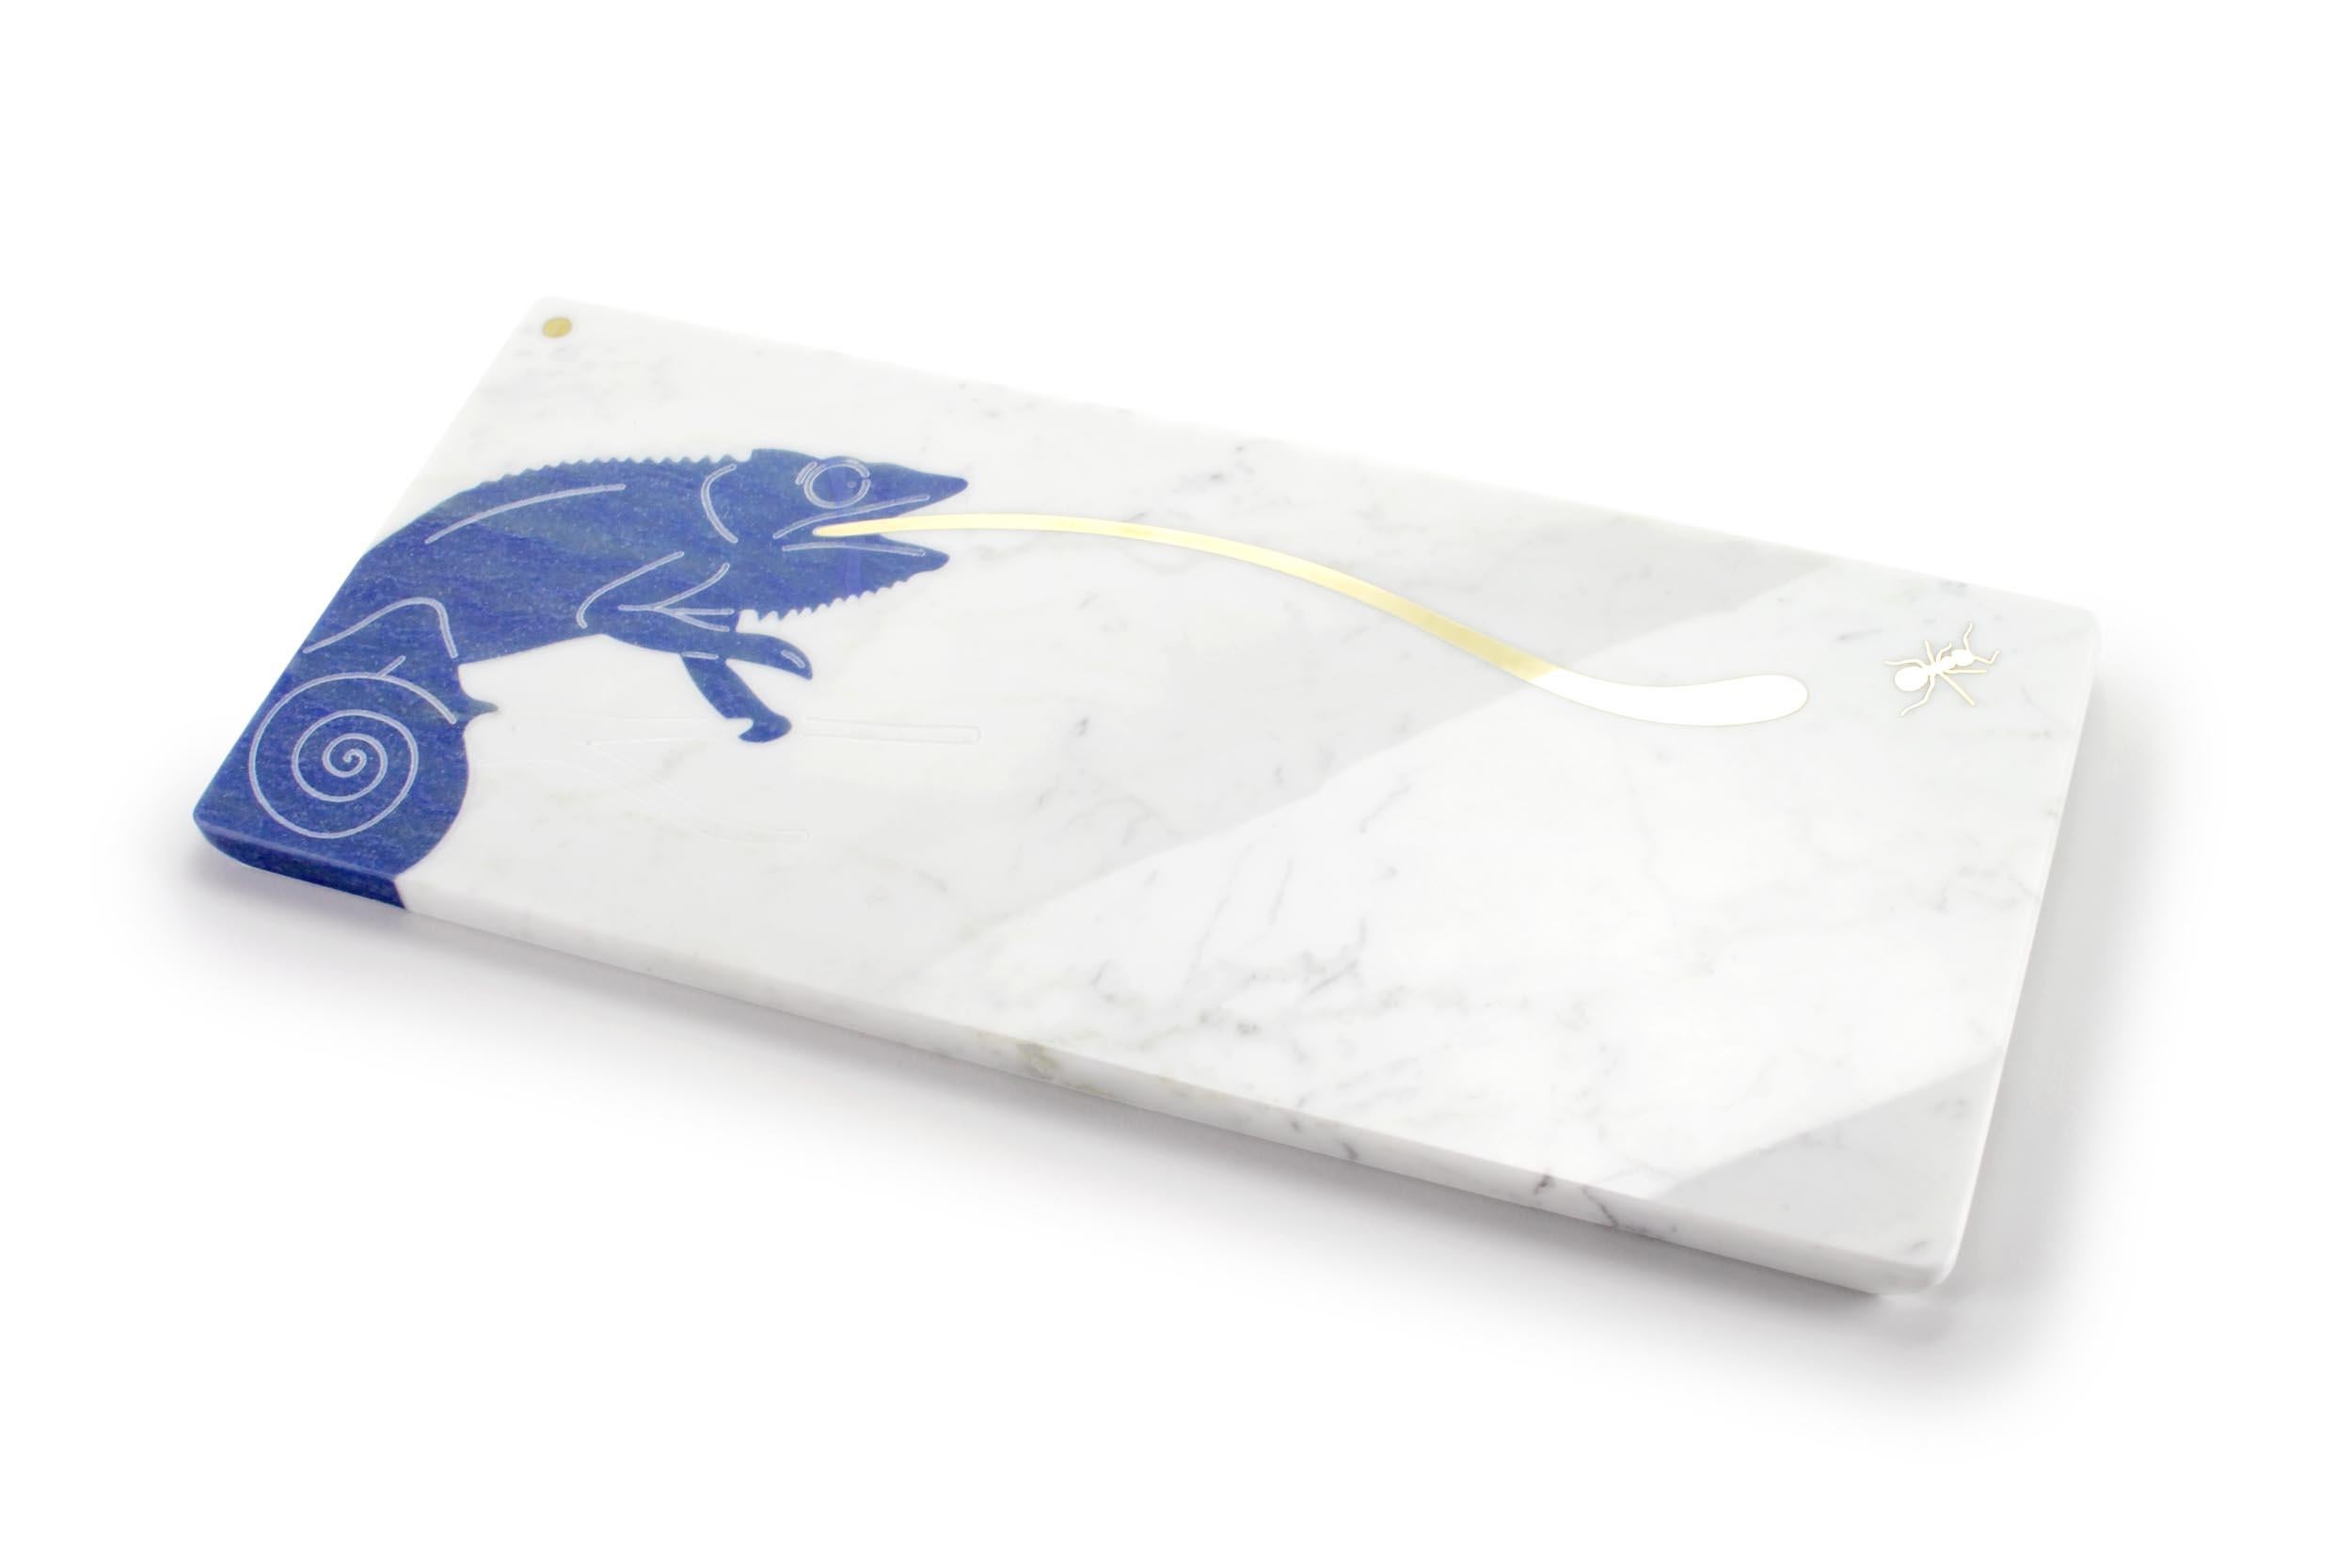 Centerpiece / Serving plate in white Carrara marble with inlay in brass and semi-precious quartzite Azul Macaubas.
Dimensions: L 45, W 20.5, H 1.5 cm
Material: White Carrara marble, Azul Macaubas, brushed brass.

Pieruga proudly creates elegant